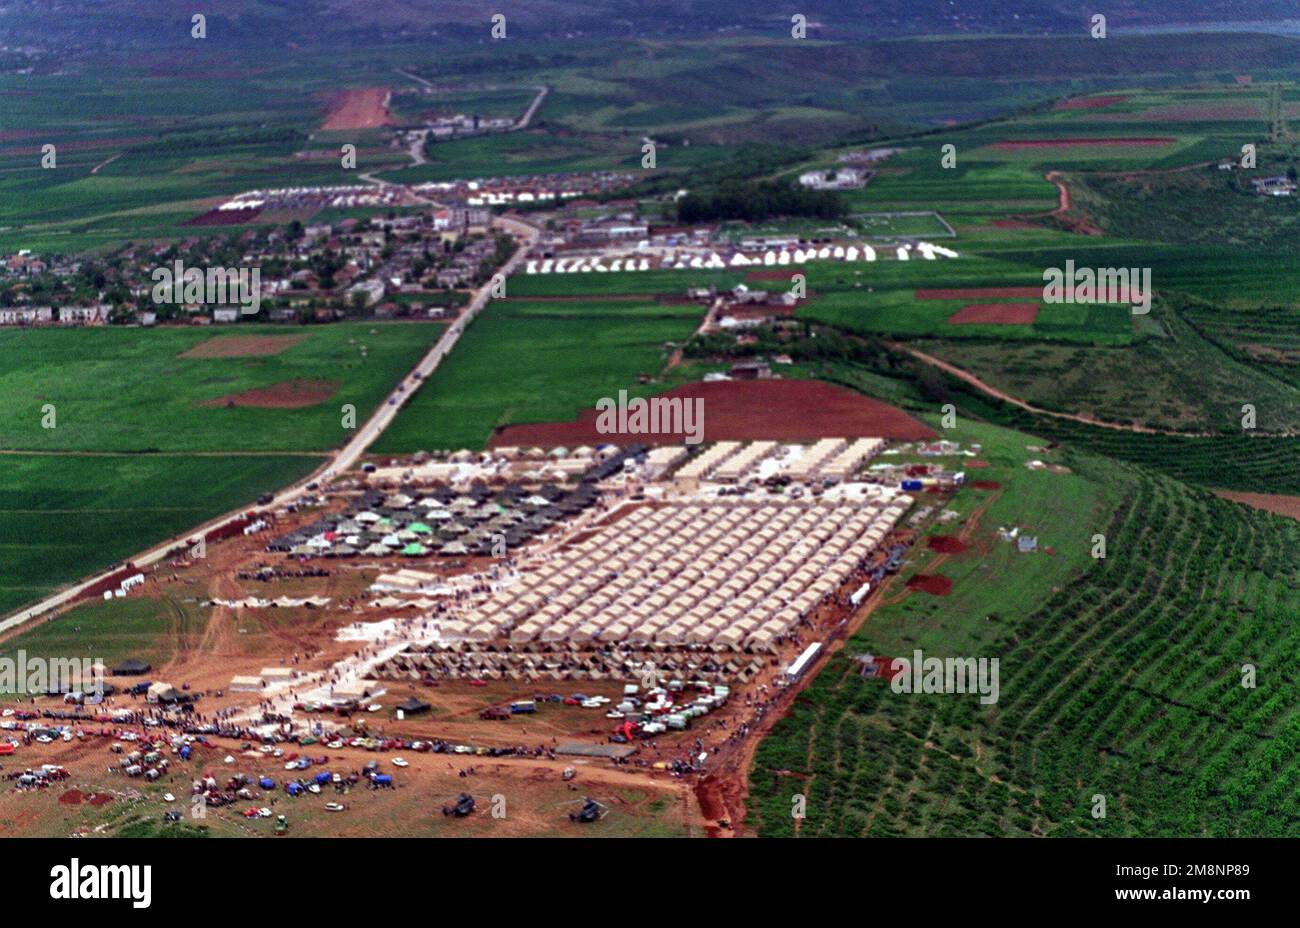 An aerial of a refugee camp near Kukes, Albania, from an MH-53E from HM-15. HM-15 is currently embarked on the Amphibious Assault ship, USS INCHON, (MCS 12) (not shown), USS INCHON which is operating in the Mediterranean and Adriatic Sea, supporting Operation Sustain Hope, a joint, combined NATO and U.S. military humanitarian relief effort in conjunction with civilian relief agencies. Operation Sustain Hope is bringing relief to thousands of refugees created from the recent unrest in the Kosovo region. Subject Operation/Series: SUSTAIN HOPE Base: Kukes Country: Albania (ALB) Stock Photo